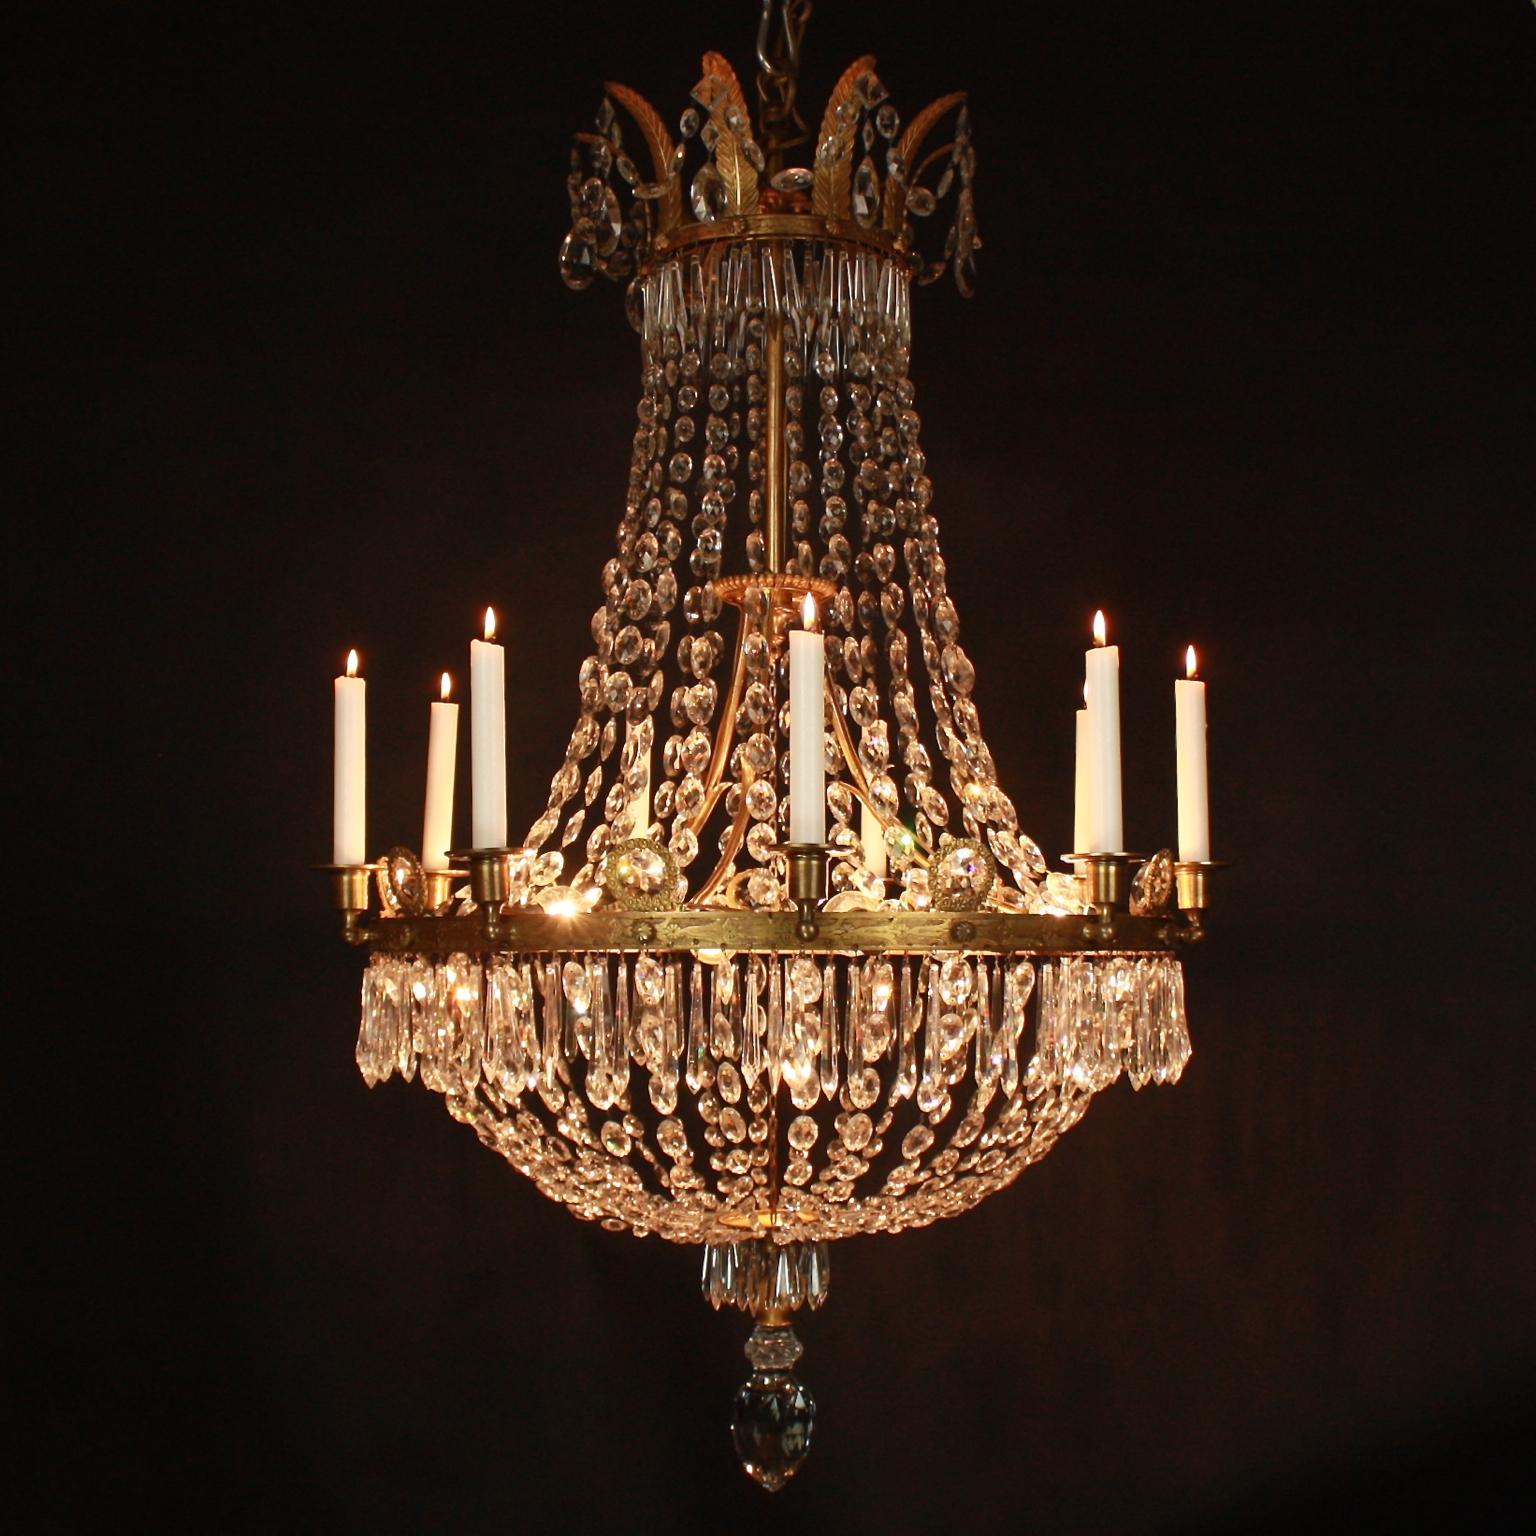 French Early 19th Century Empire Crystal-Cut and Gilt-Bronze Basket Chandelier For Sale 5